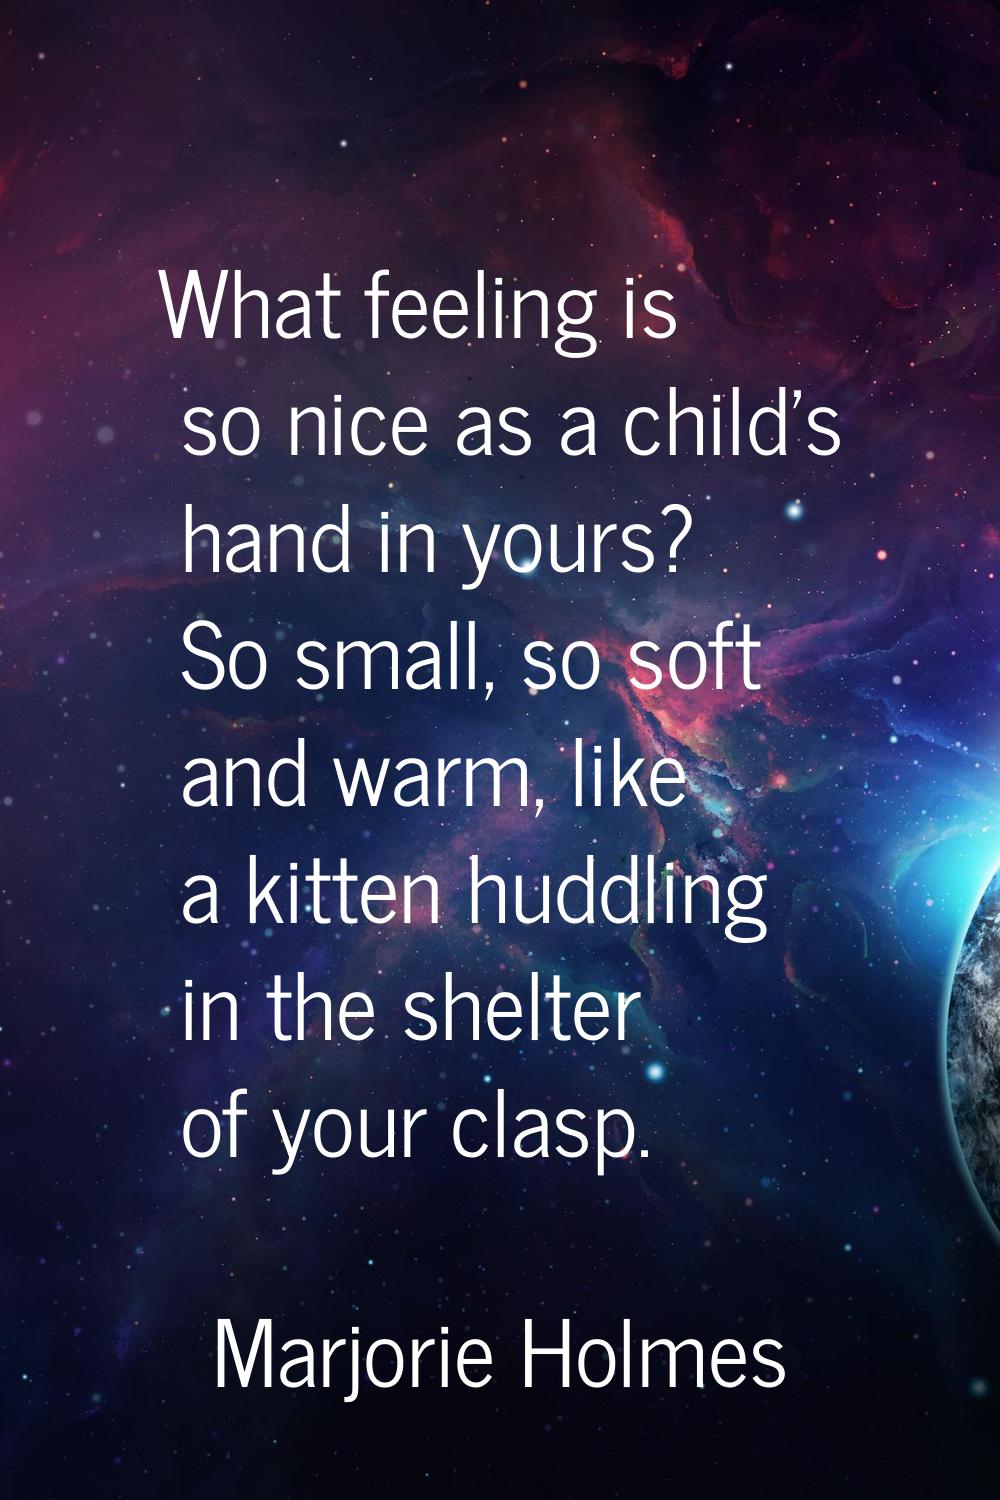 What feeling is so nice as a child's hand in yours? So small, so soft and warm, like a kitten huddl